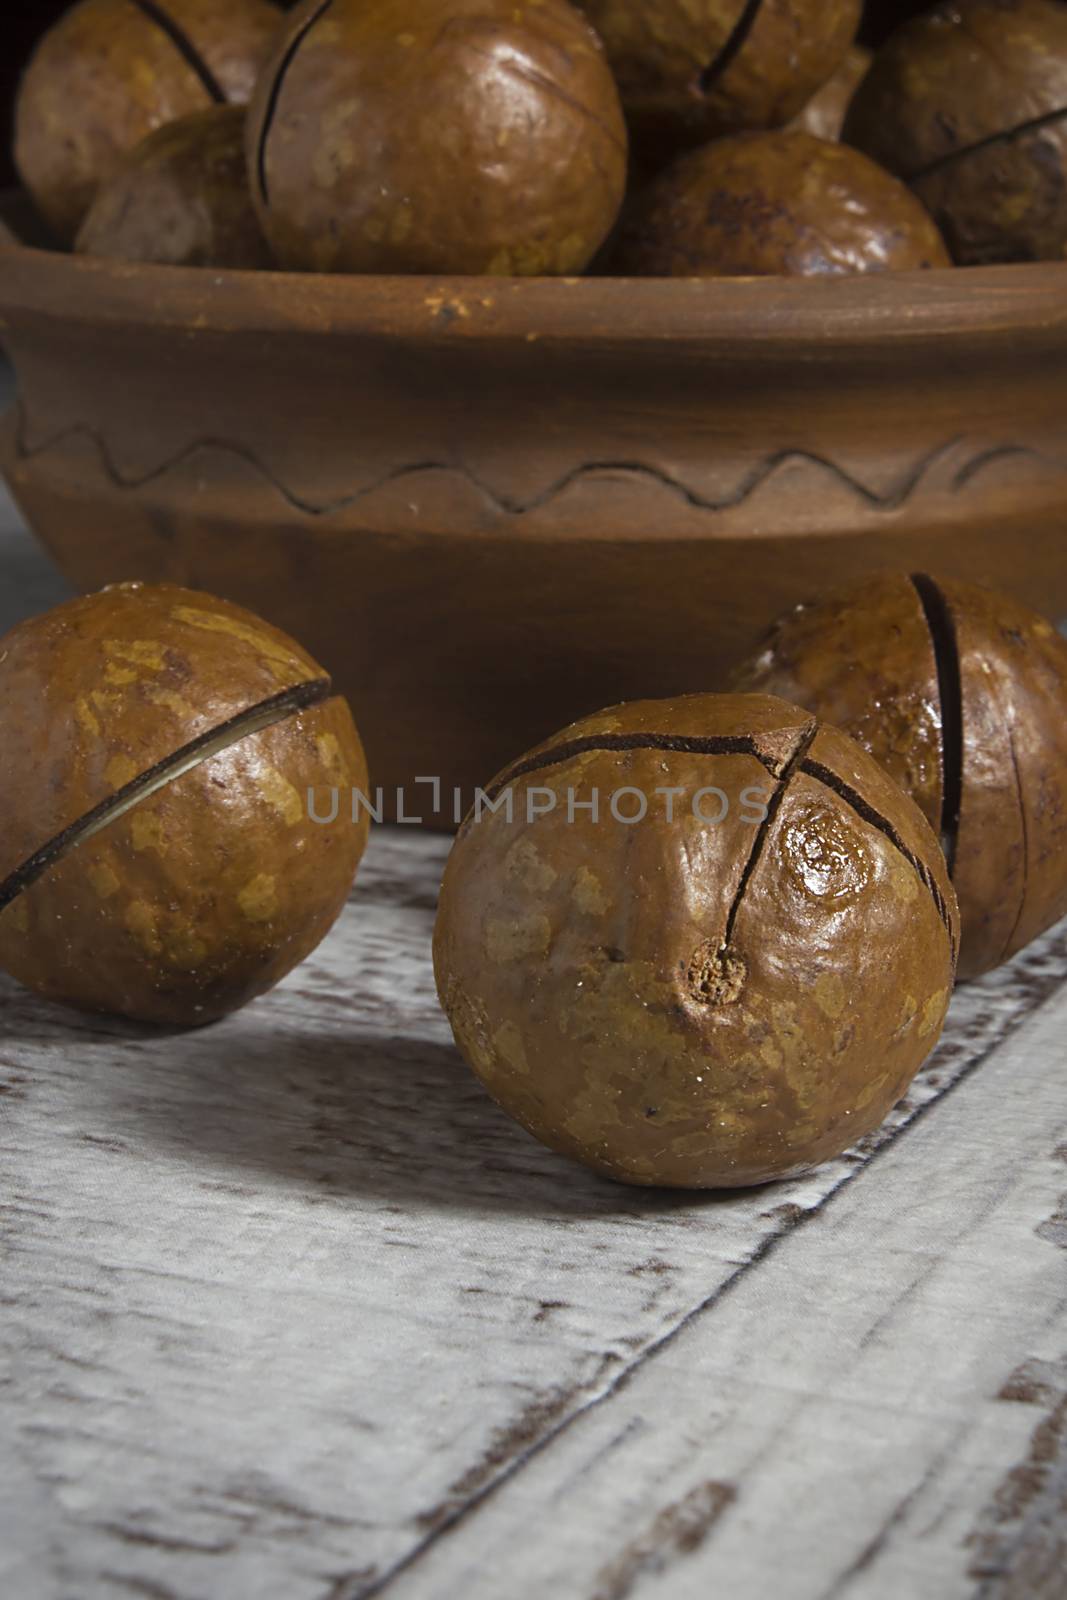 Macadamia nuts in shells in earthenware dish on wooden table